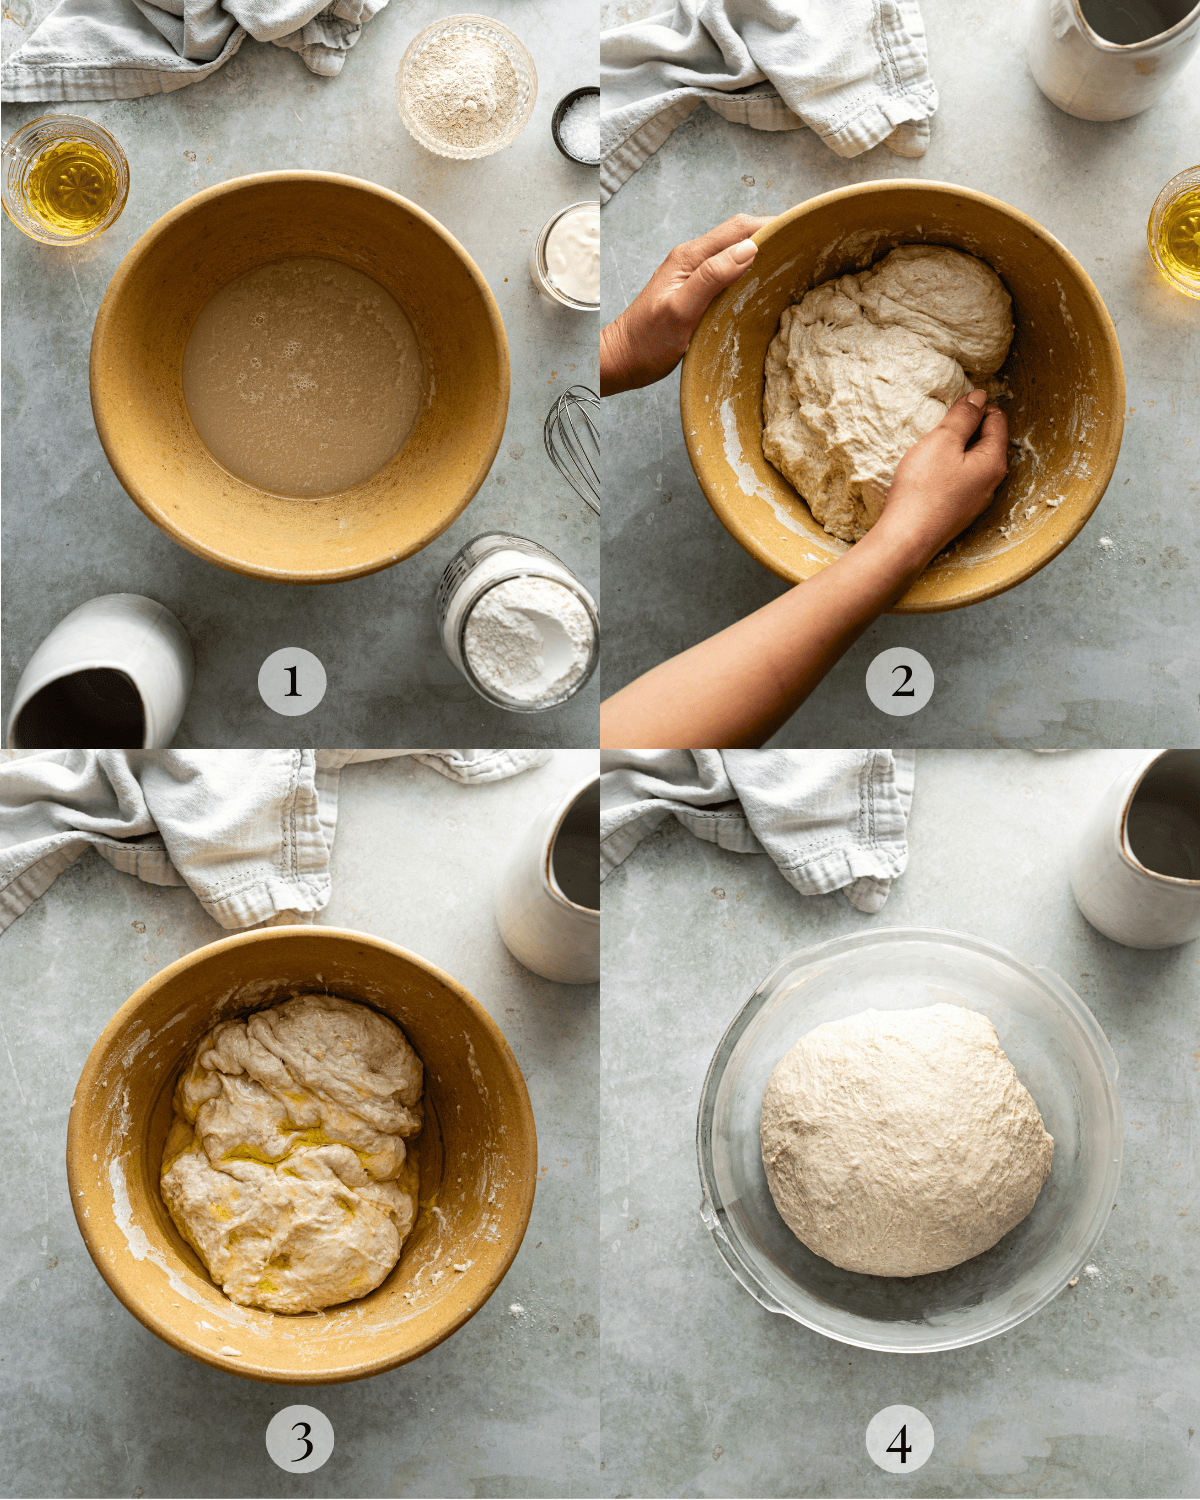 Photo grid from top left to bottom right: Yeast blooming in t yellow mixing bowl, hands kneading dough, dough with olive oil poured in, rounded dough in a clear bowl.